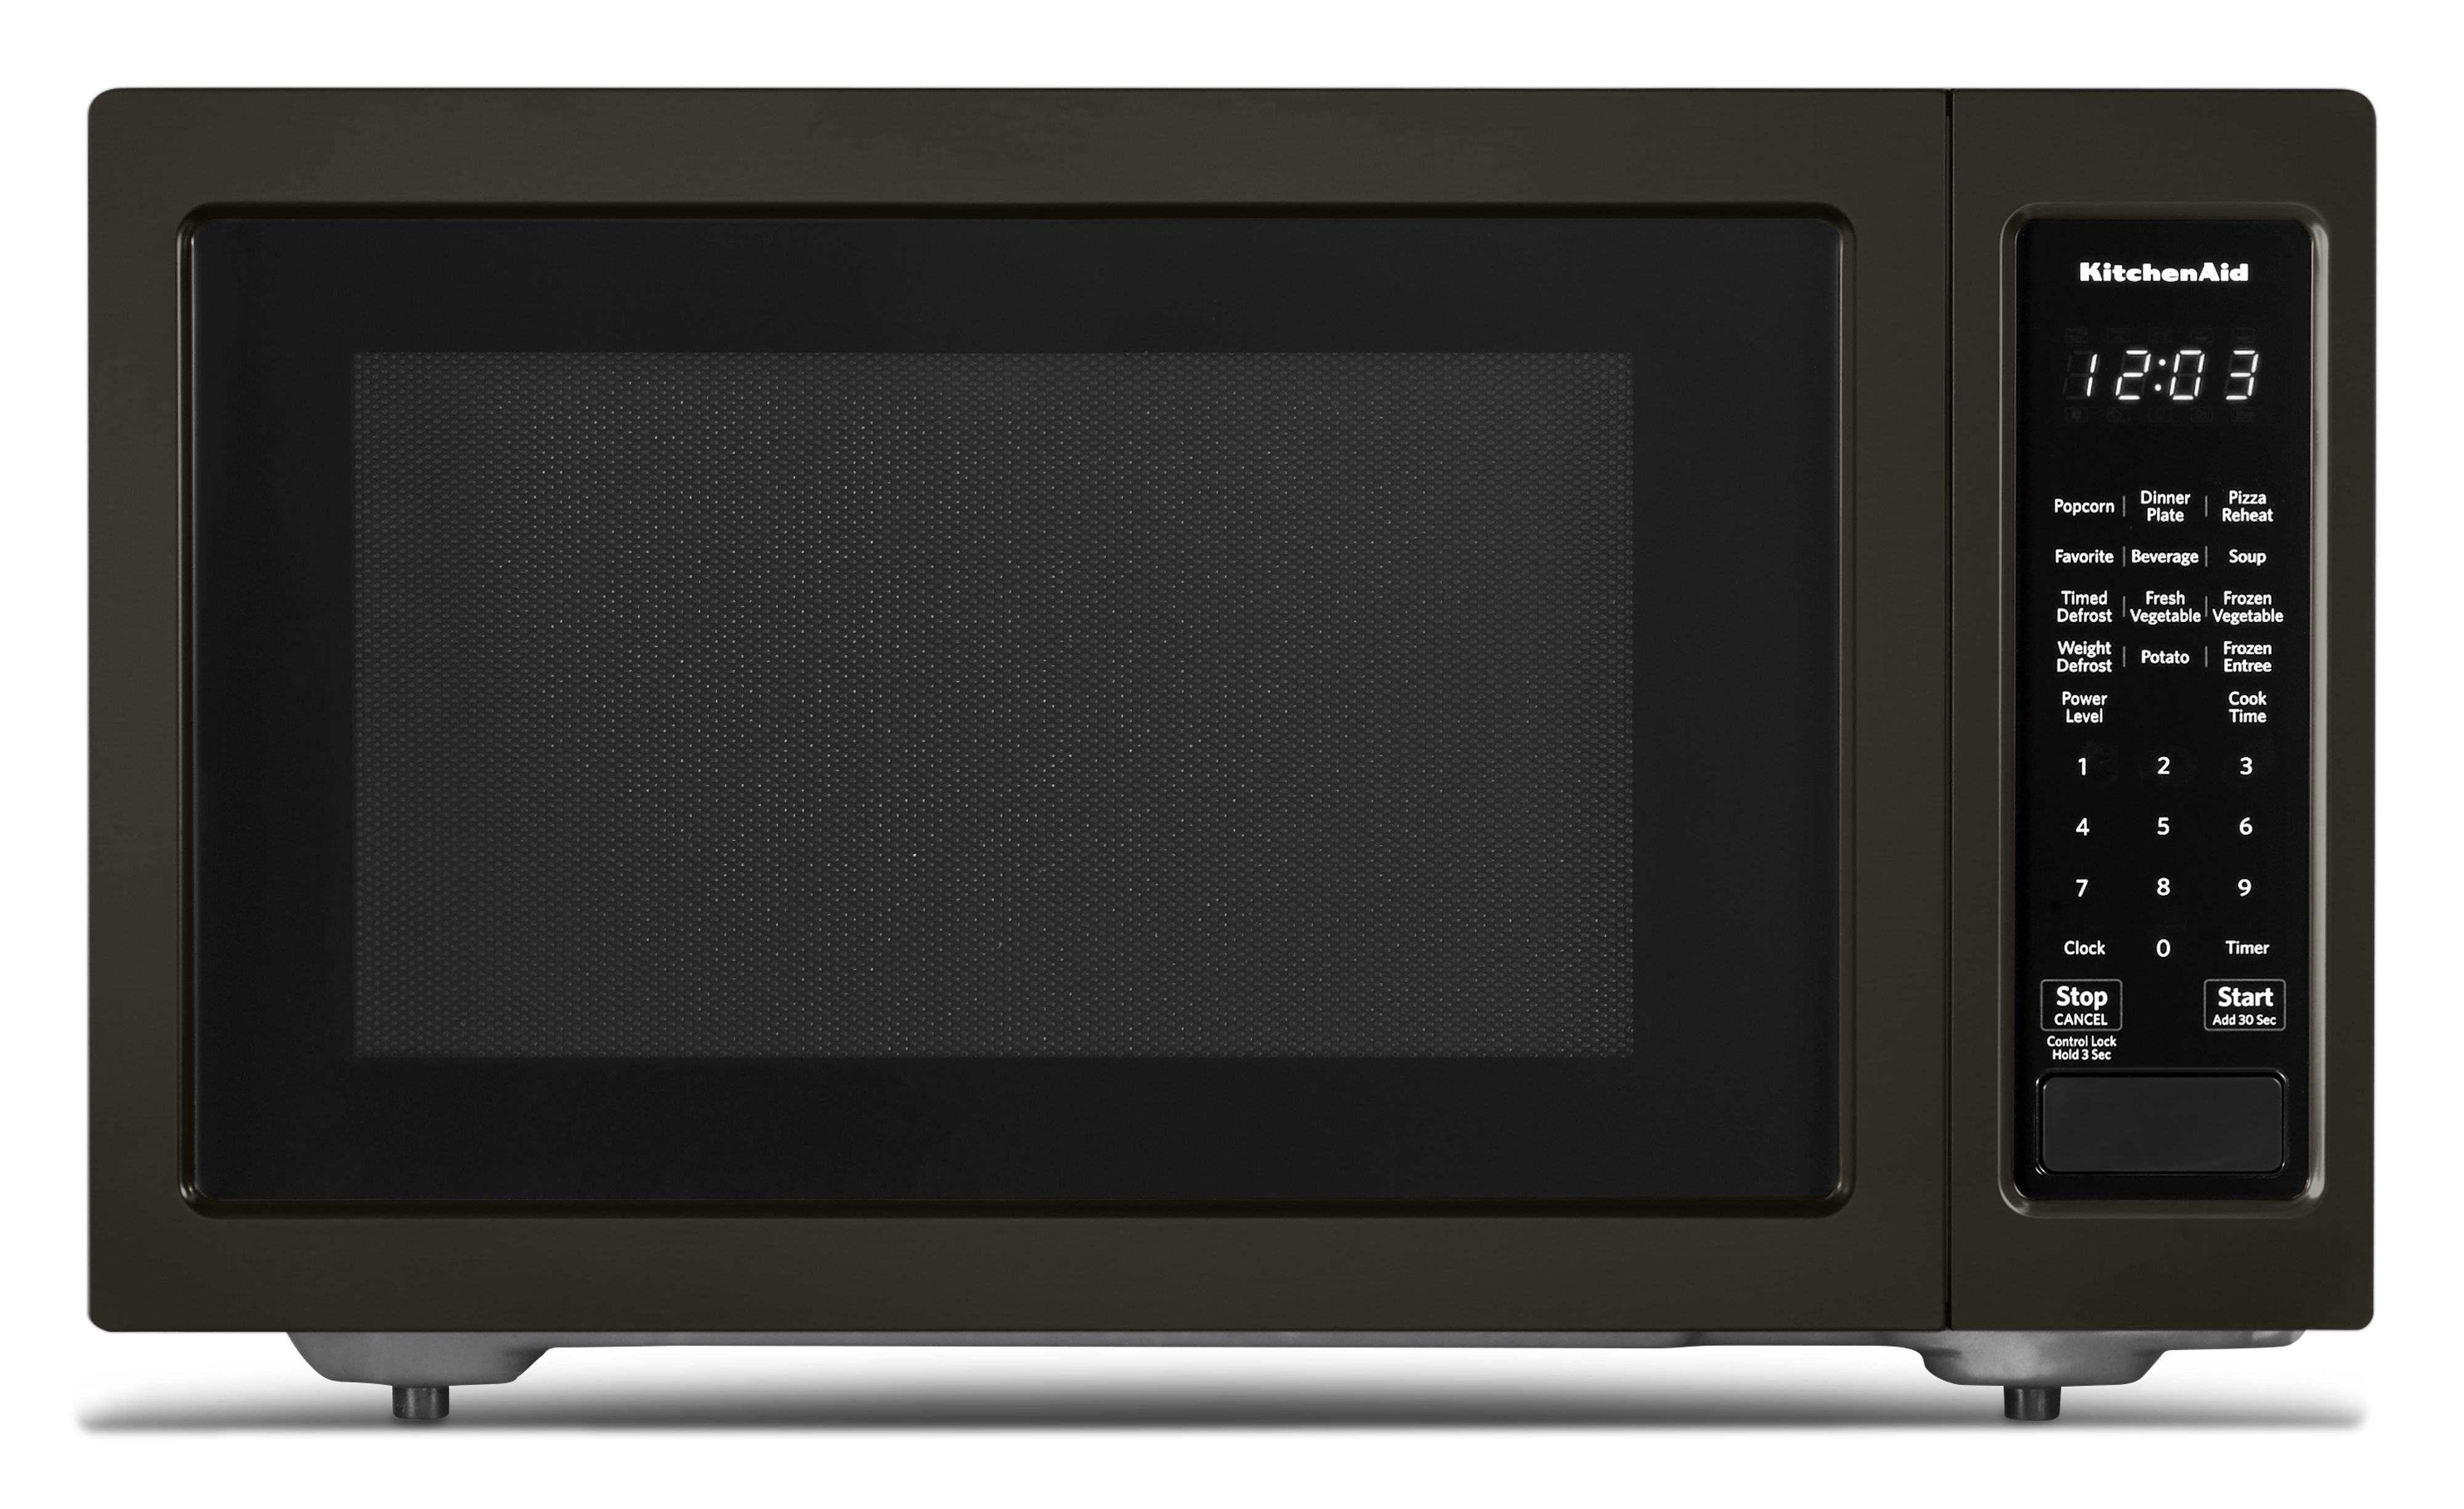 Kitchenaid KMCS1016GBS 22 Inch Countertop Microwave with 1.6 cu. ft